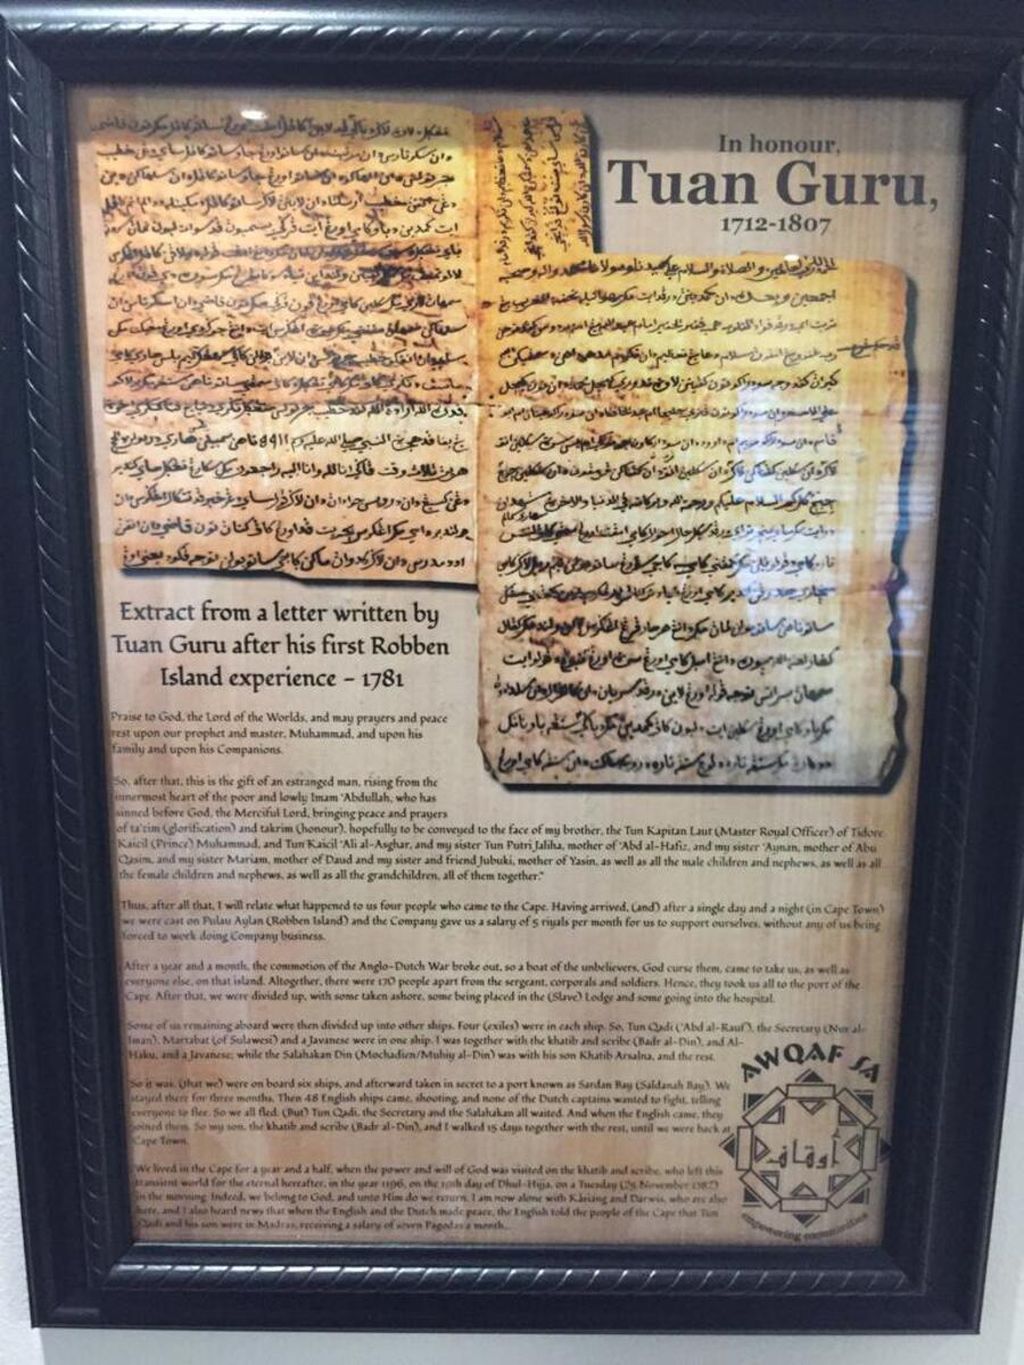 Excerpt about the story of Tuan Guru, a cleric from Indonesia who became a preacher in South Africa during the era of colonialism.